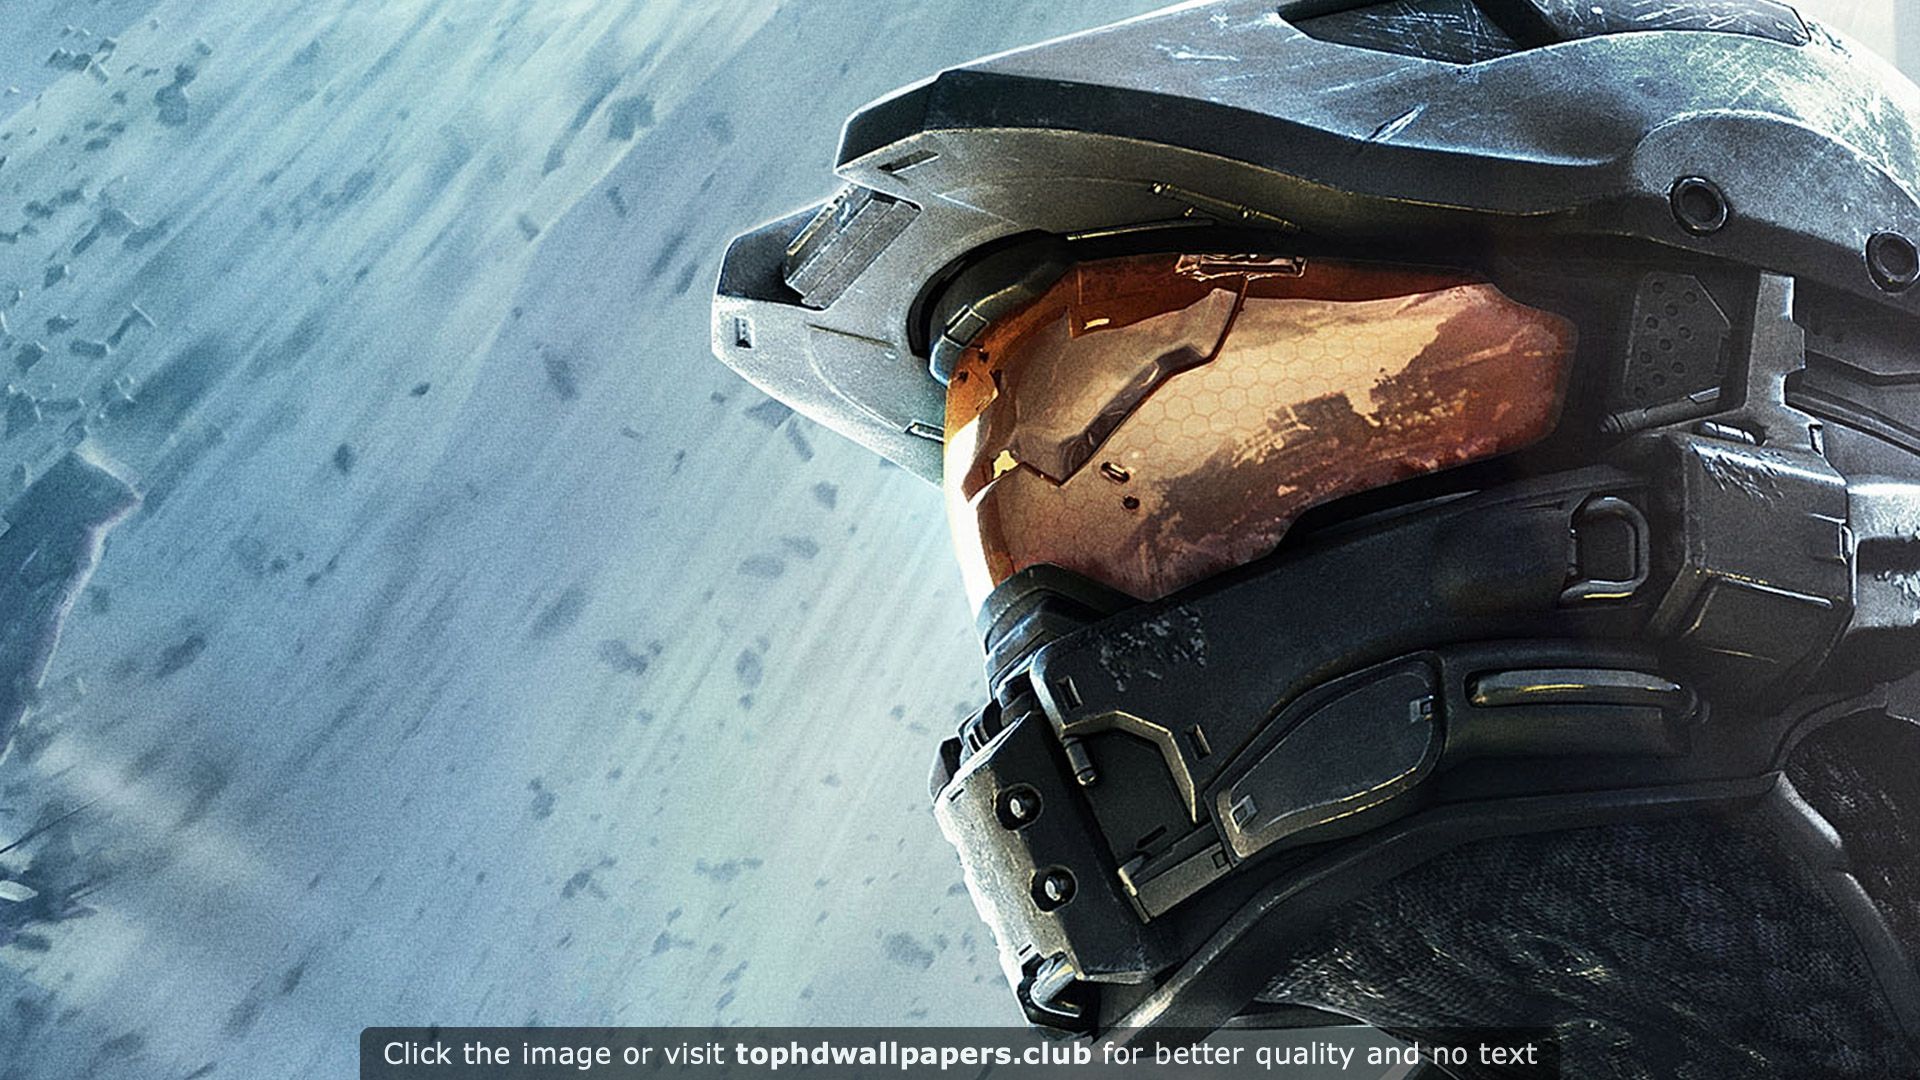 Best halo wallpapers for your PC, Mac or Mobile Device